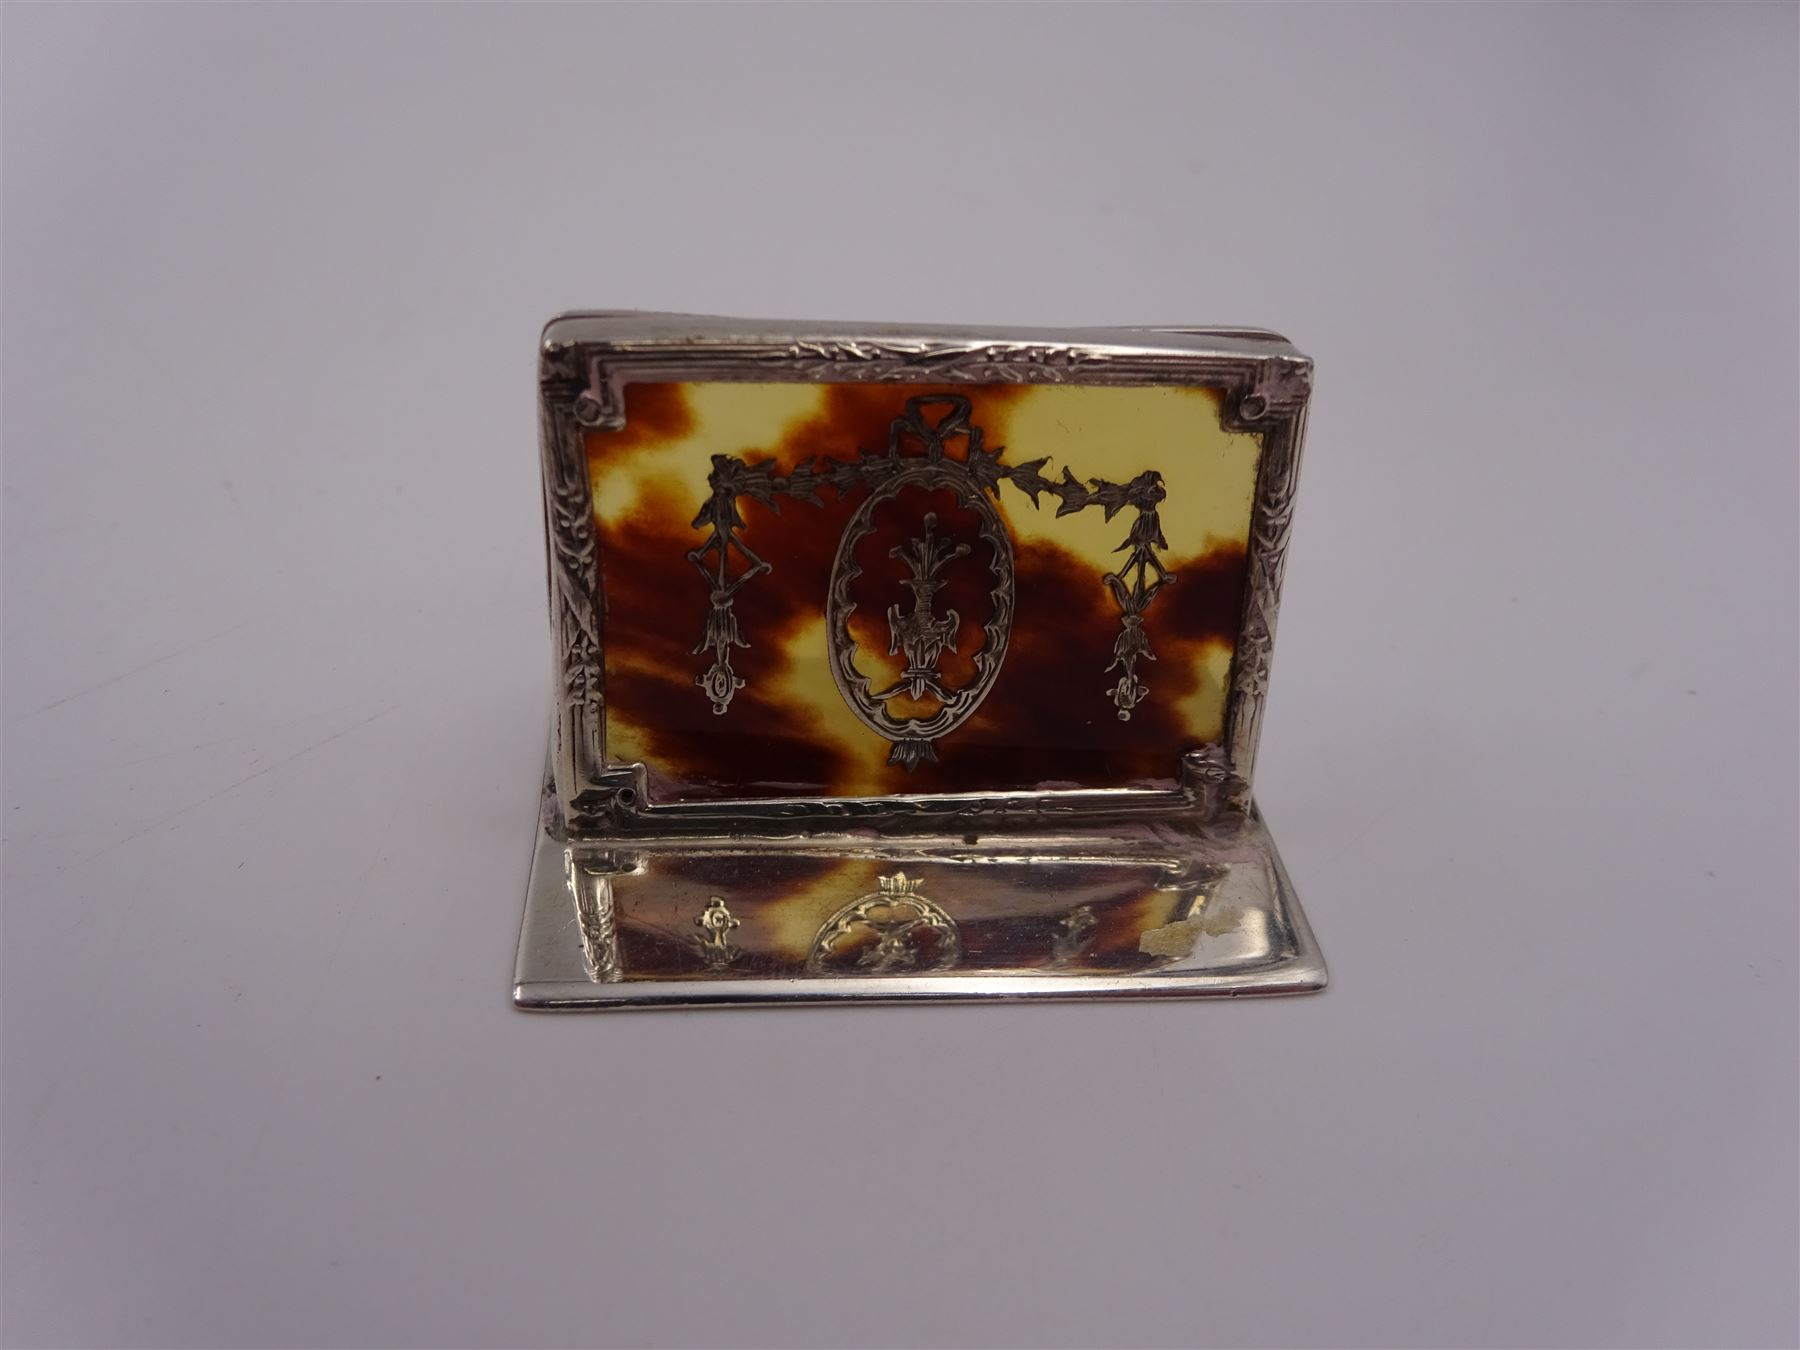 Set of six early 20th century silver mounted tortoiseshell place card holders by Asprey - Image 10 of 28